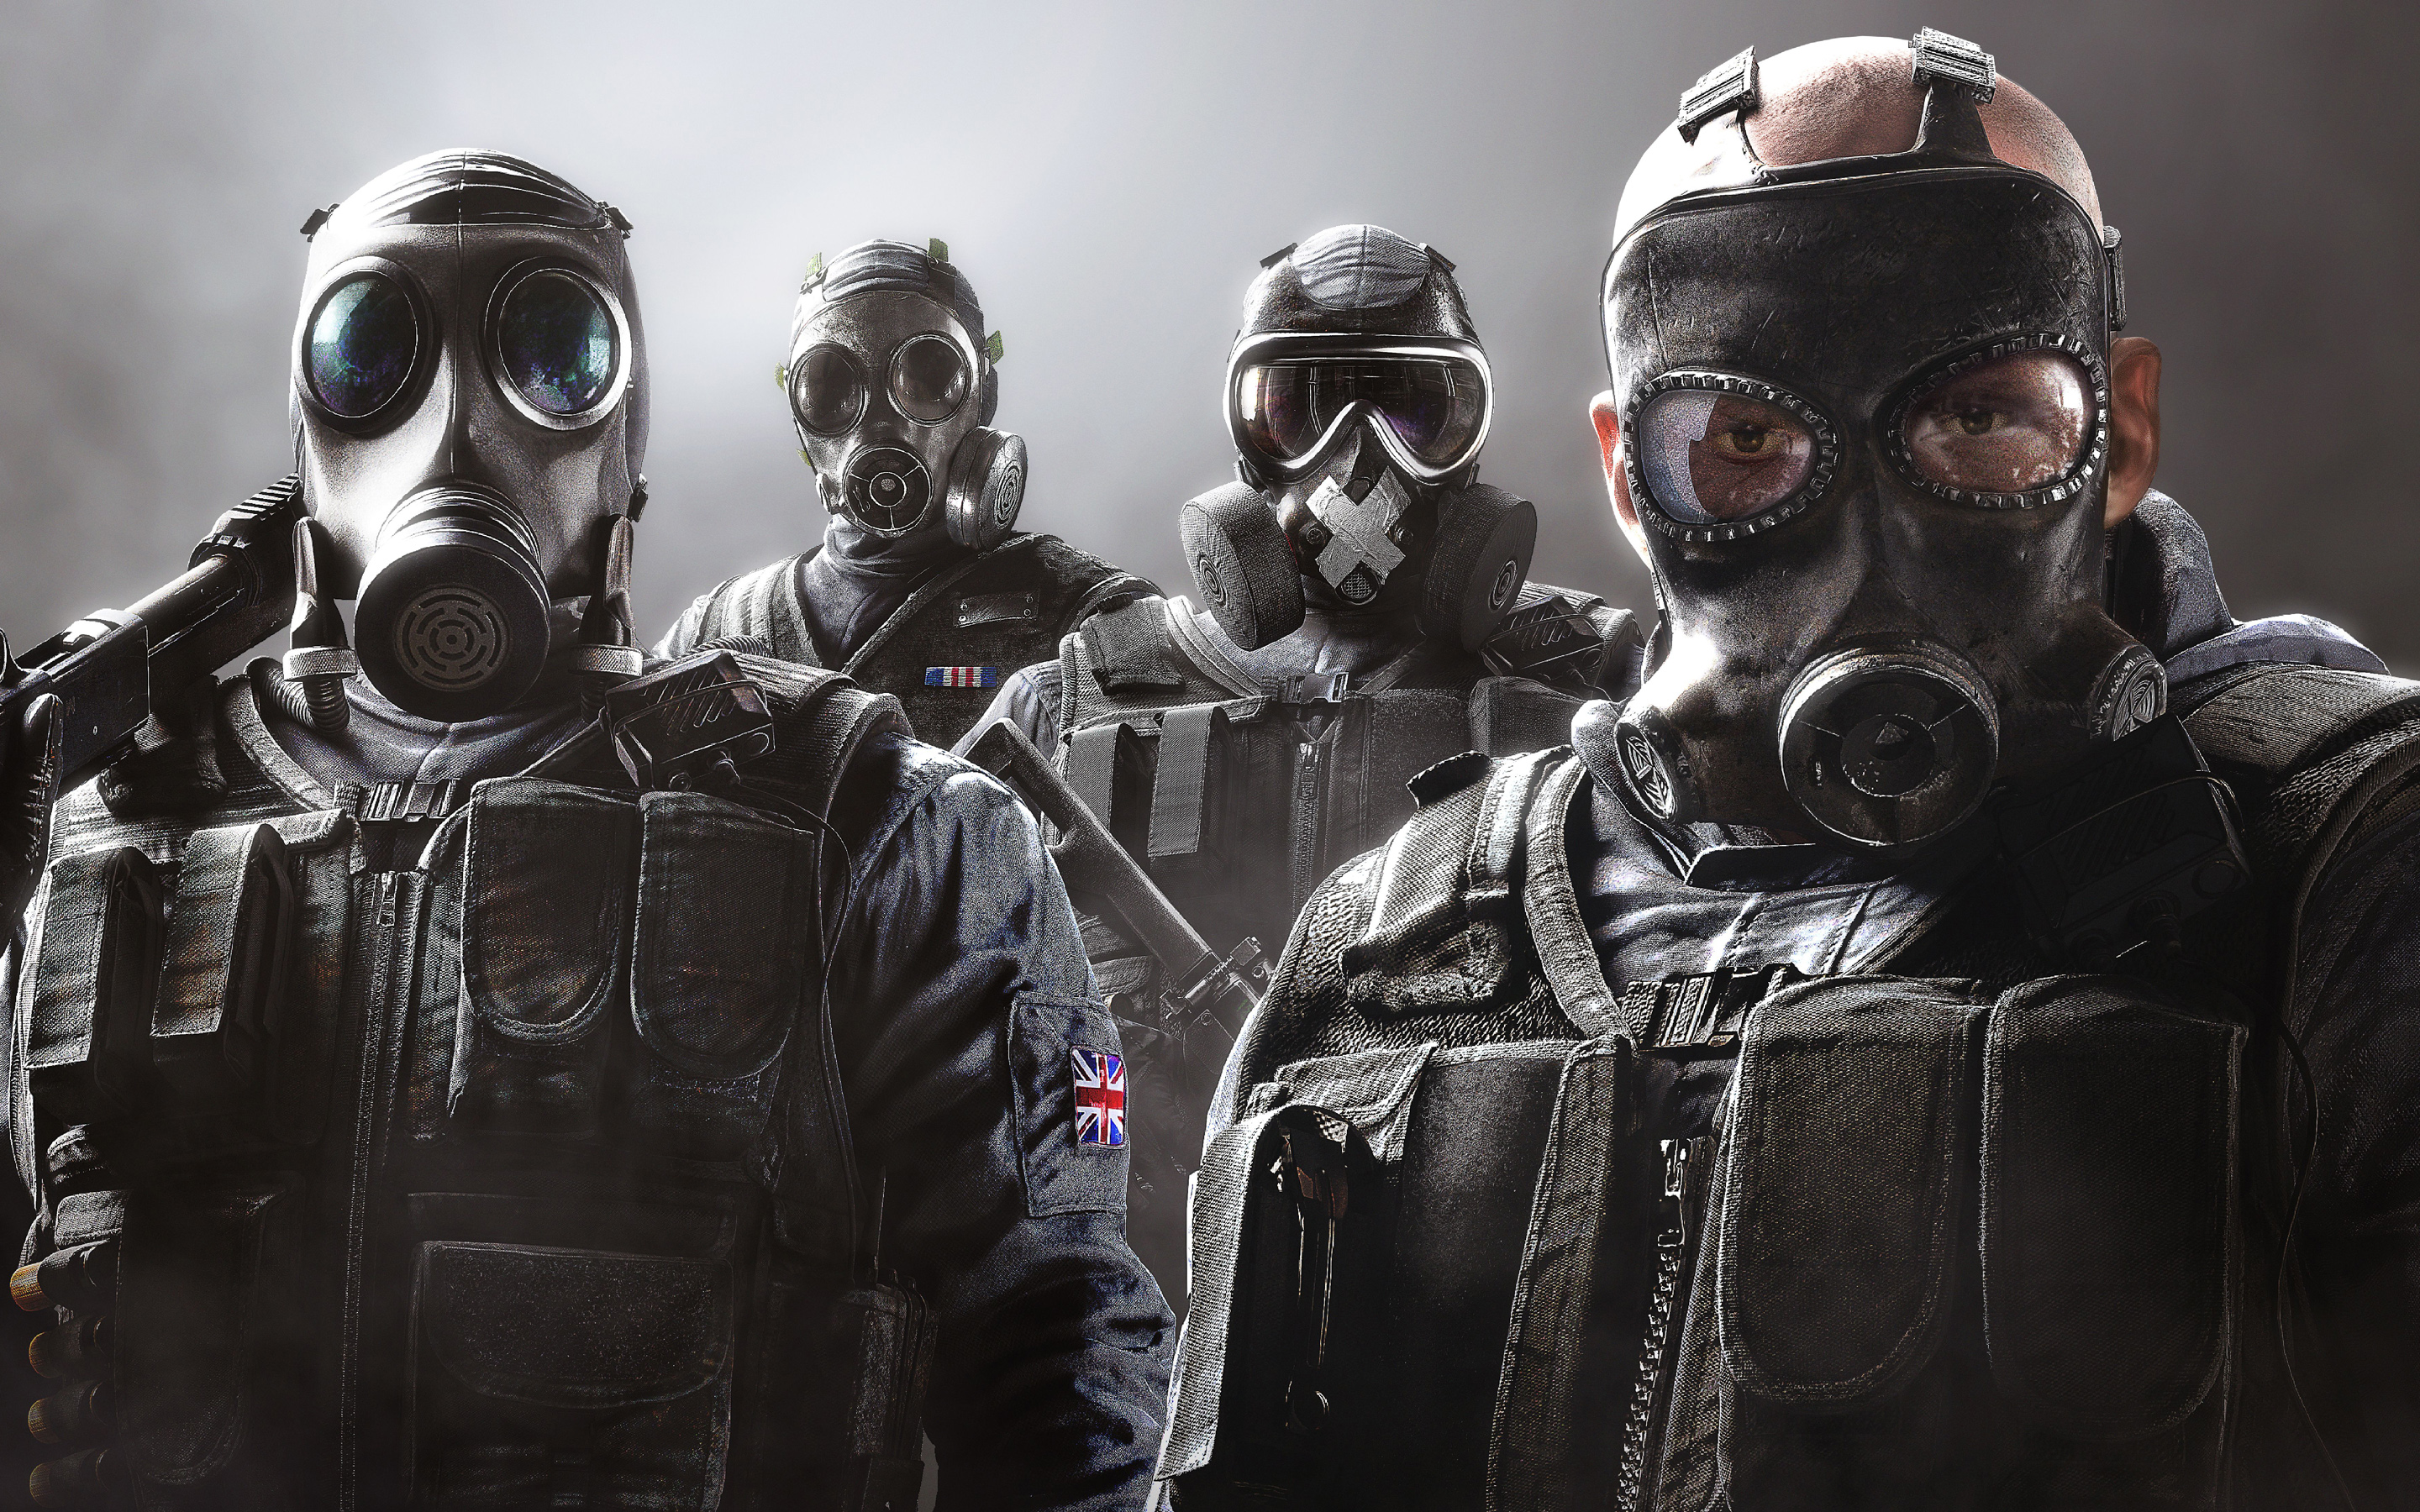 Video Game Tom Clancy's Rainbow Six: Siege HD Wallpaper | Background Image